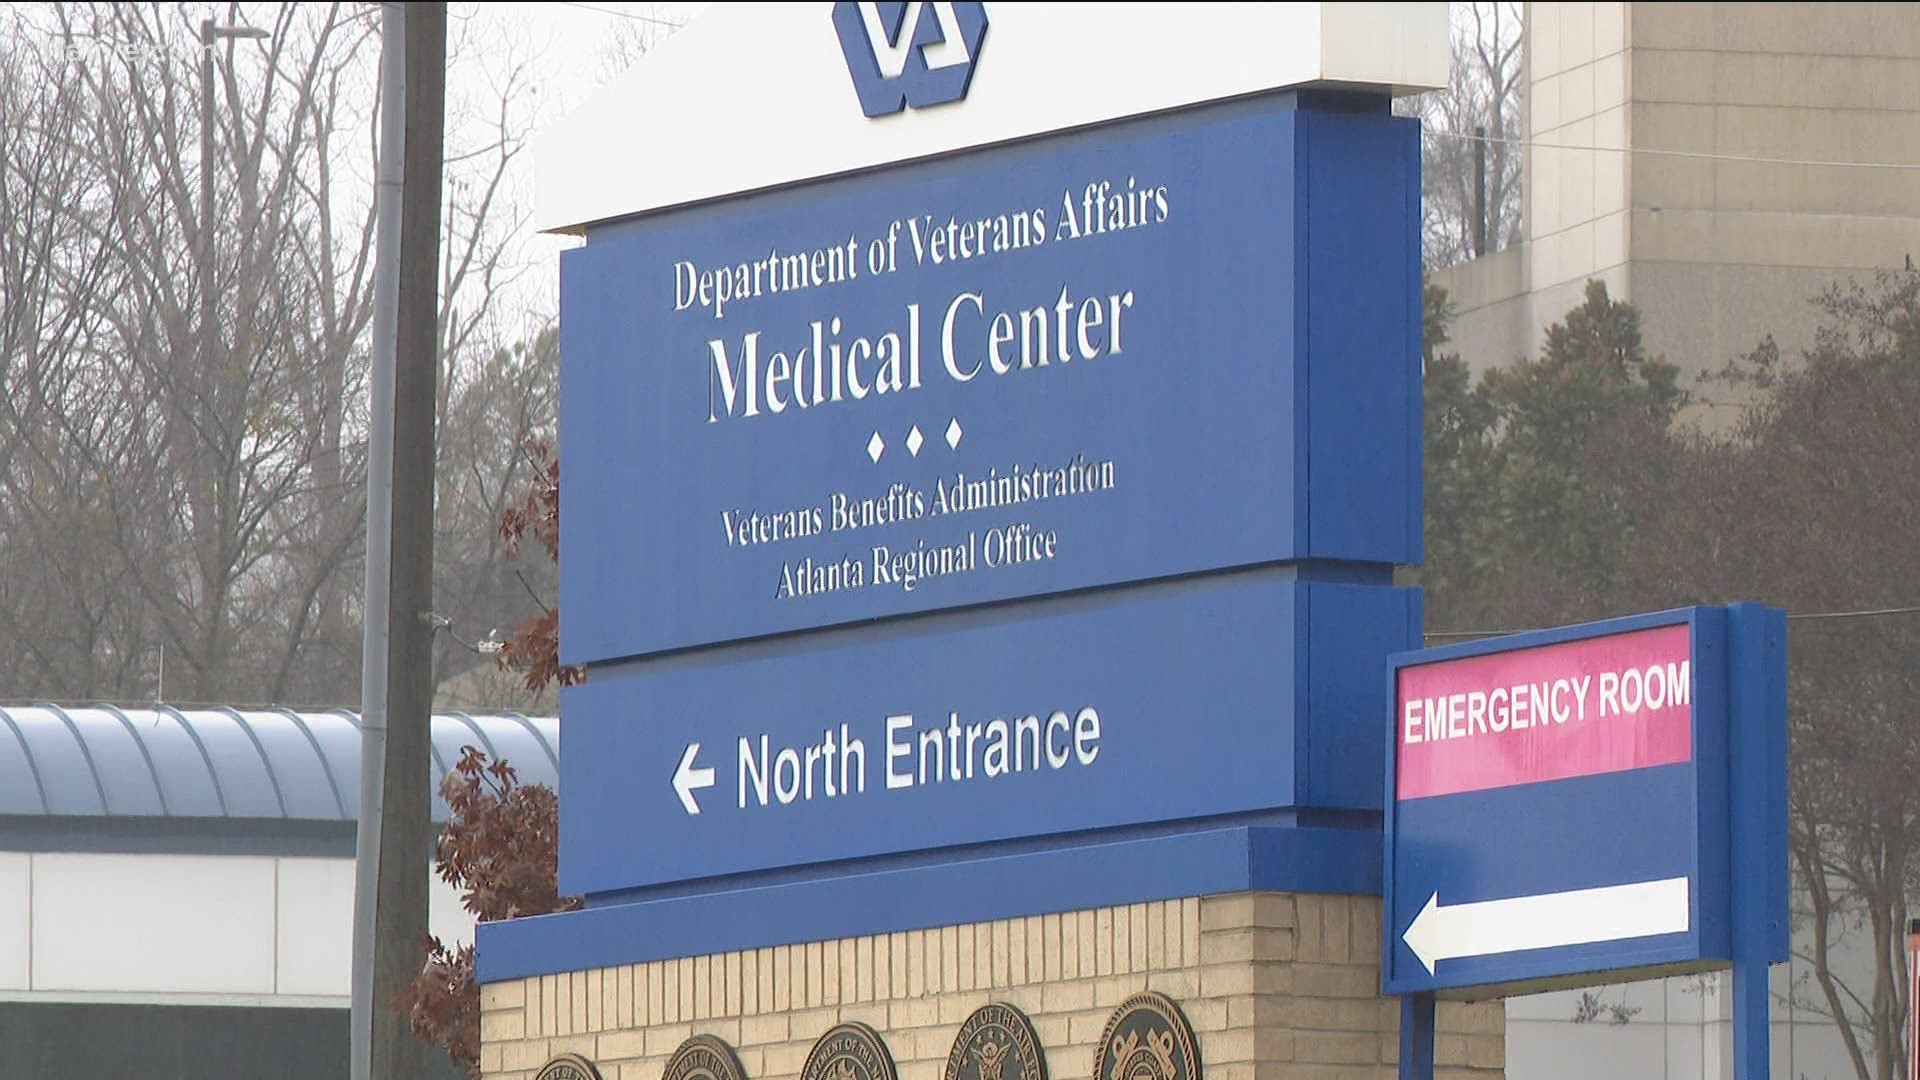 This clinic served veterans who are over 65-years-old, high-risk, or those who are essential workers.